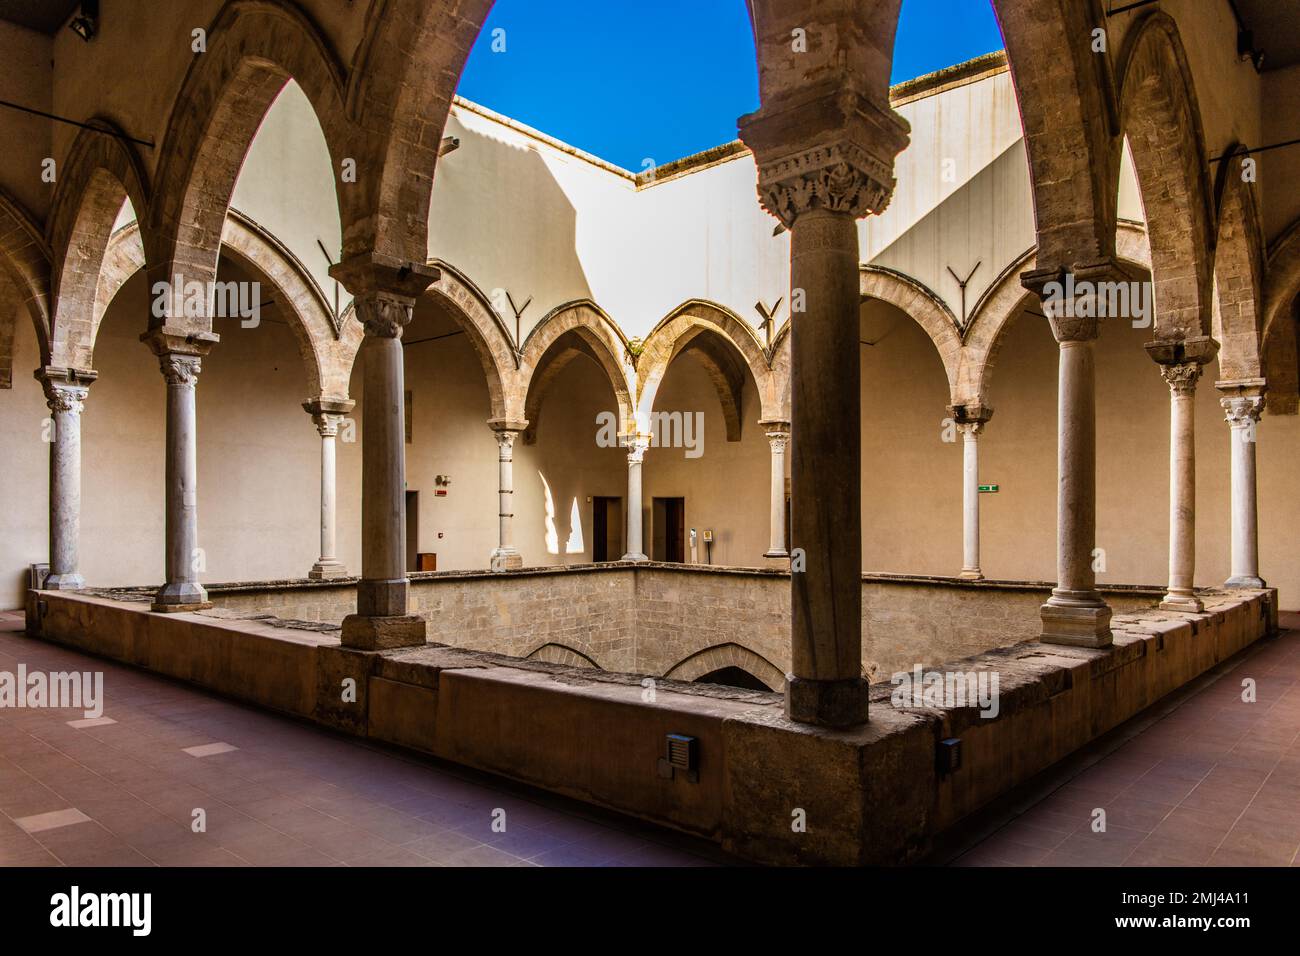 Chiaramonte Steri Palace, 17th century venue of the Court of the Holy Inquisition, Palermo, Sicily, Palermo, Sicily, Italy Stock Photo